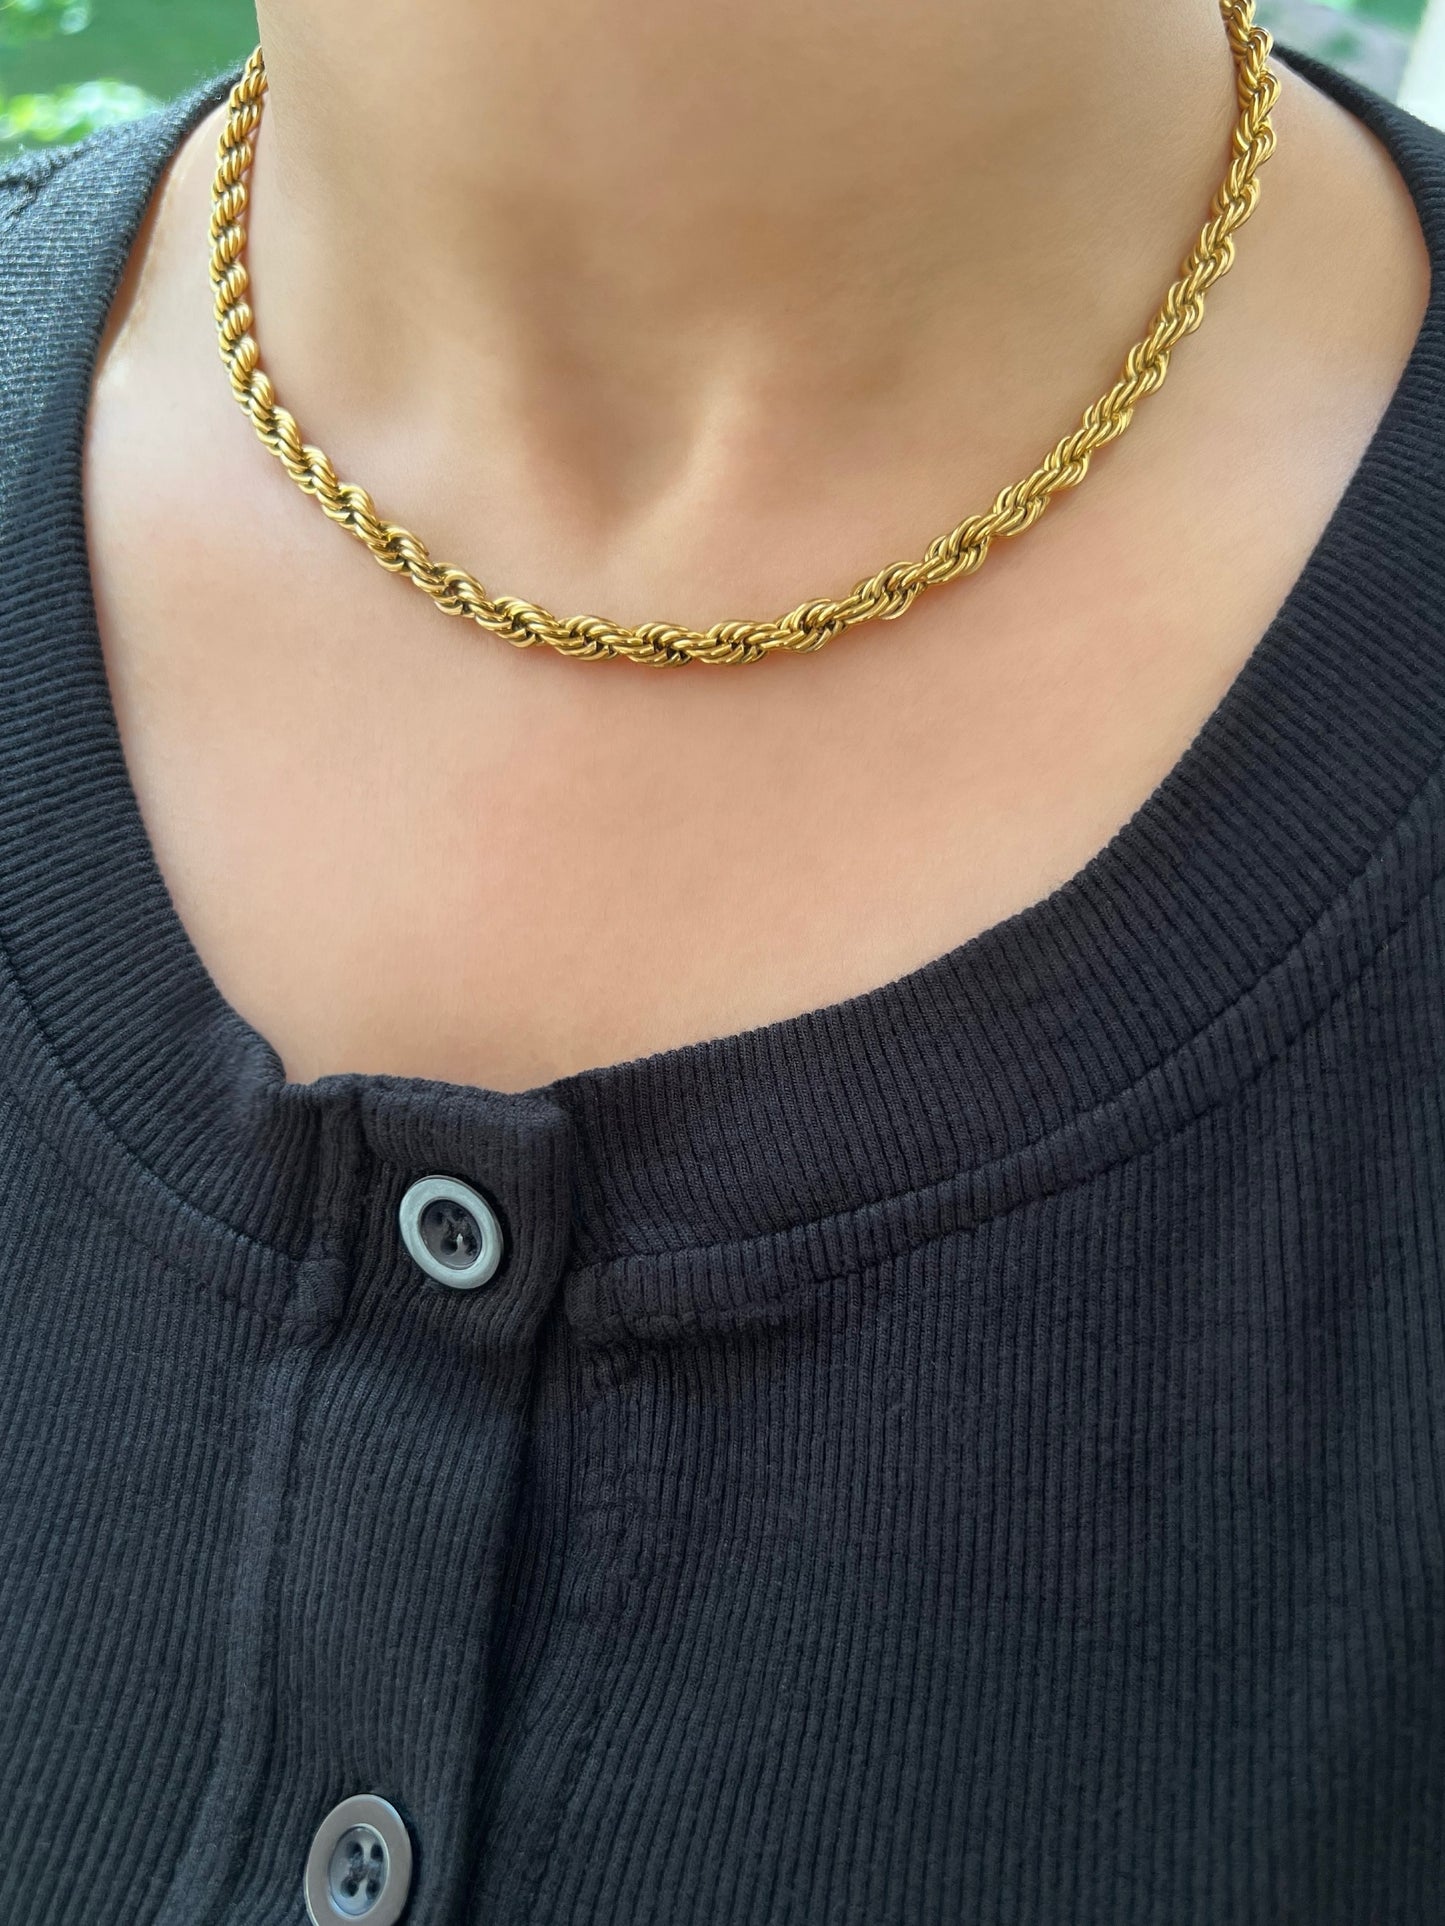 Gold Twisted Rope Chain Necklace- 5mm